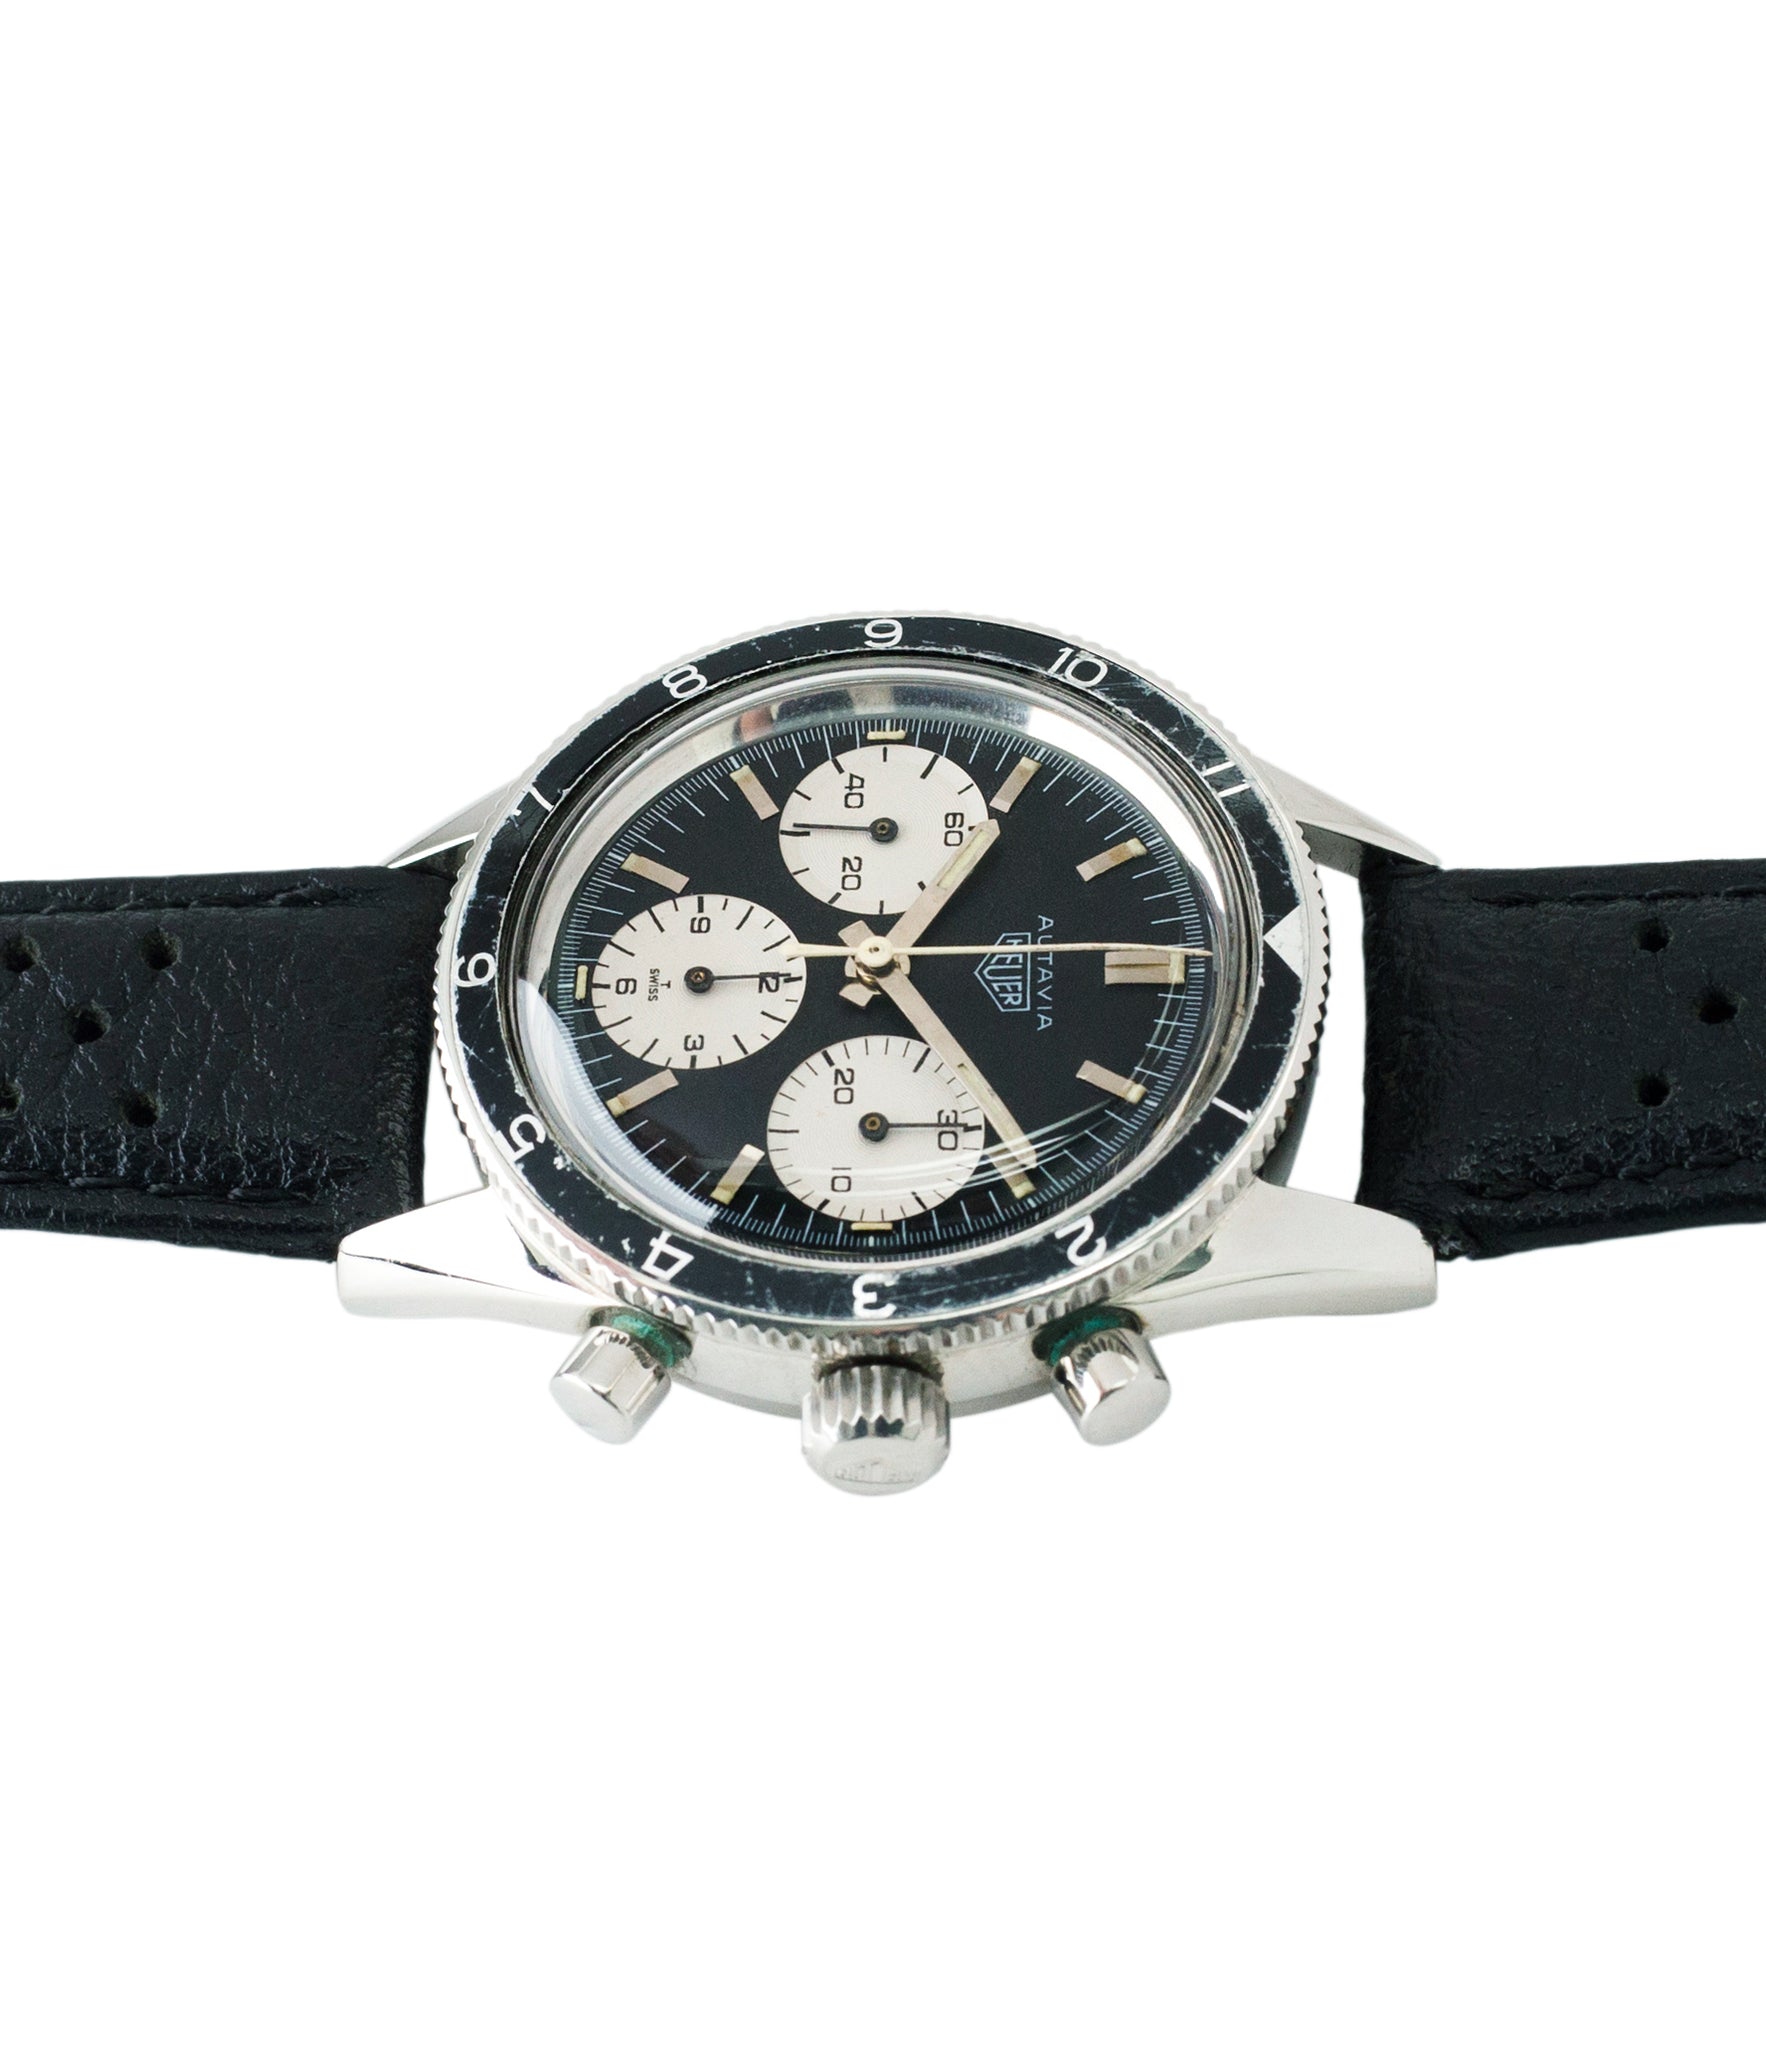 Buy vintage racing watch Rindt Heuer Autavia 2446 Valjoux 72 manual-winding steel sport chronograph watch for sale online at A Collected Man London UK vintage rare watch specialist